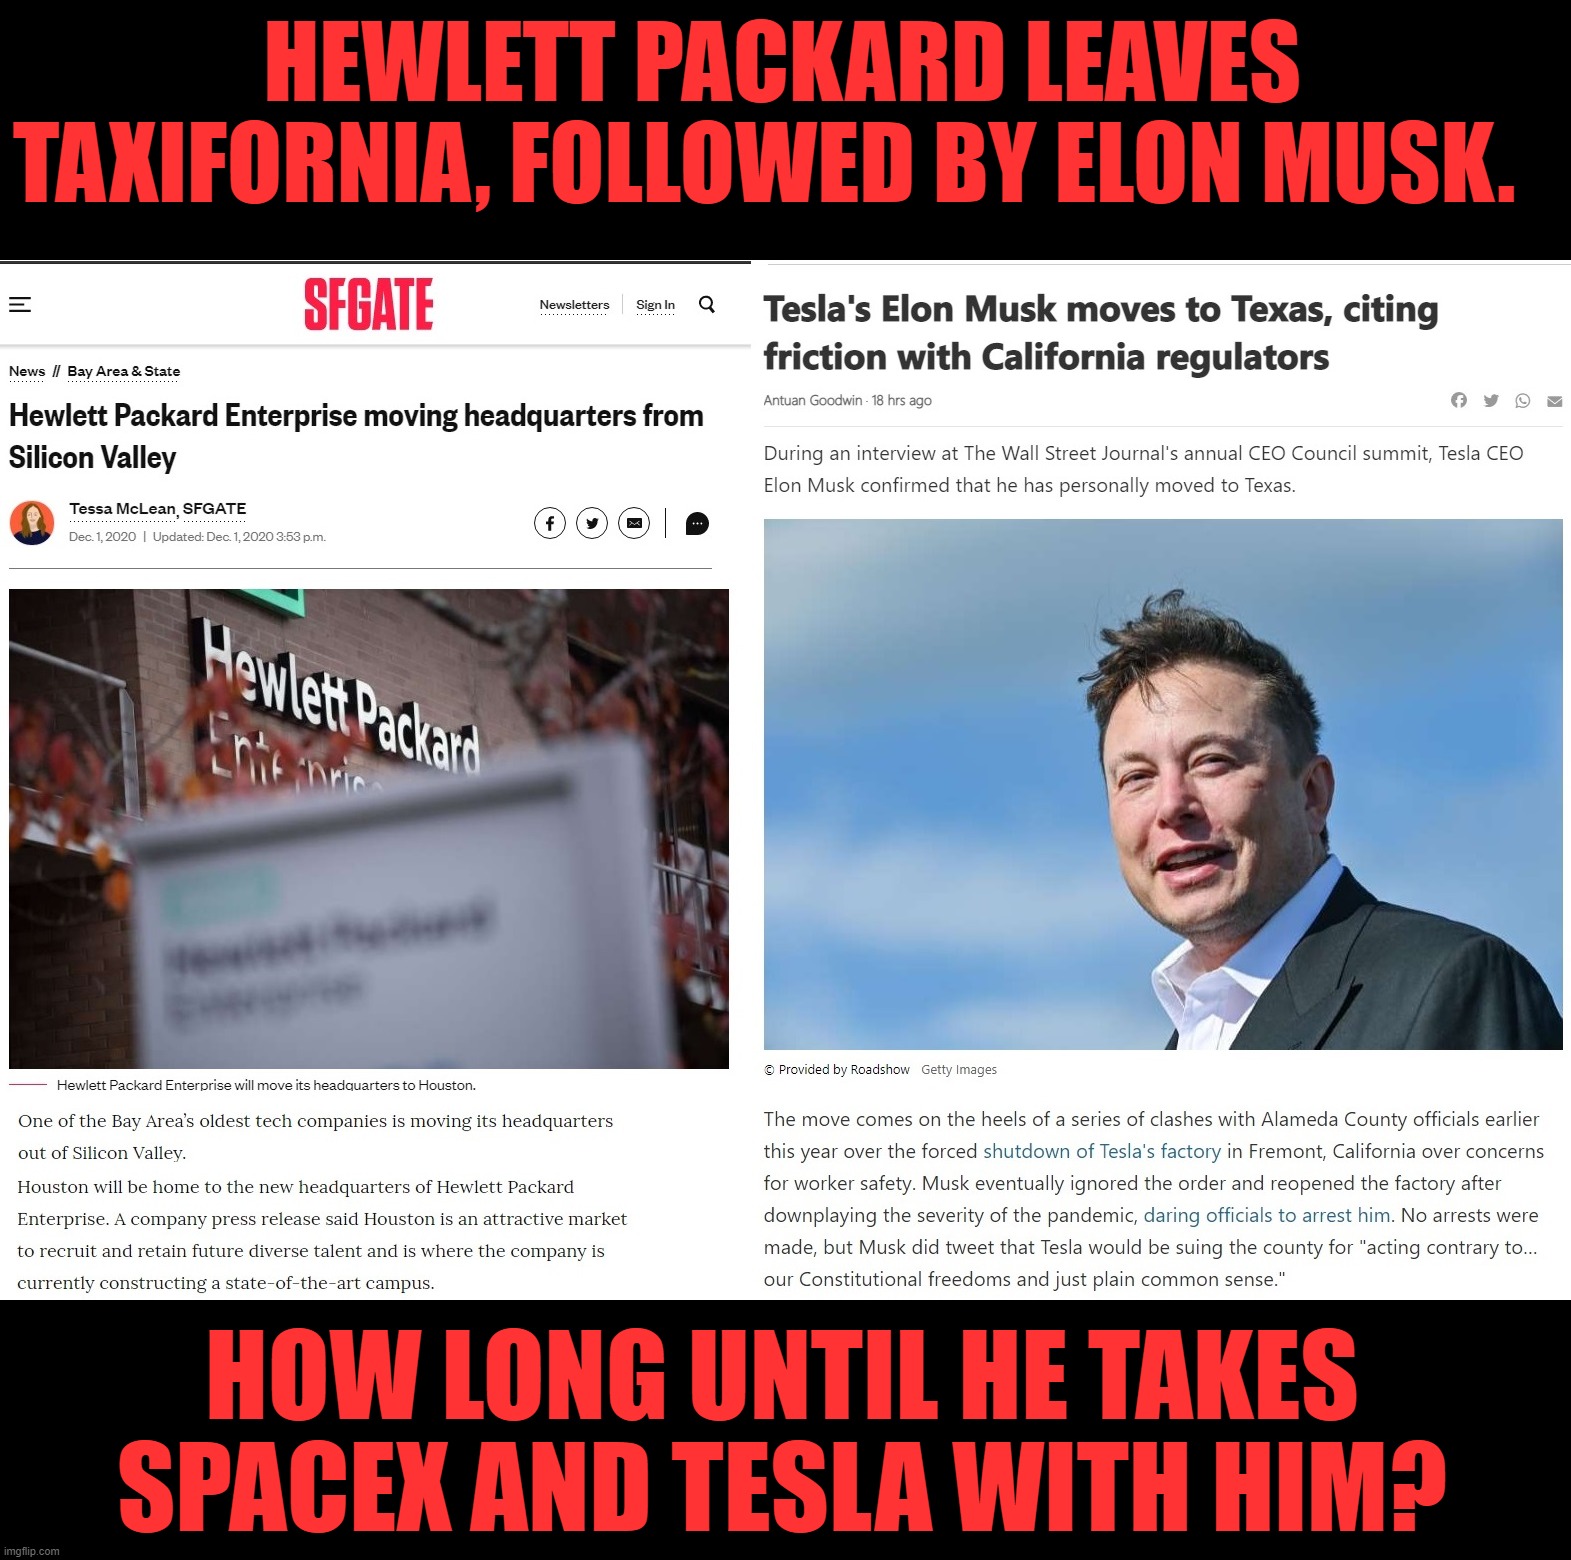 Wake up Taxifornia!  Your taxes and corrupt govt are driving companies and people from our state! | HEWLETT PACKARD LEAVES TAXIFORNIA, FOLLOWED BY ELON MUSK. HOW LONG UNTIL HE TAKES SPACEX AND TESLA WITH HIM? | image tagged in elon musk,hewlett packard,taxifornia,corruptifornia,let's raise their taxes | made w/ Imgflip meme maker